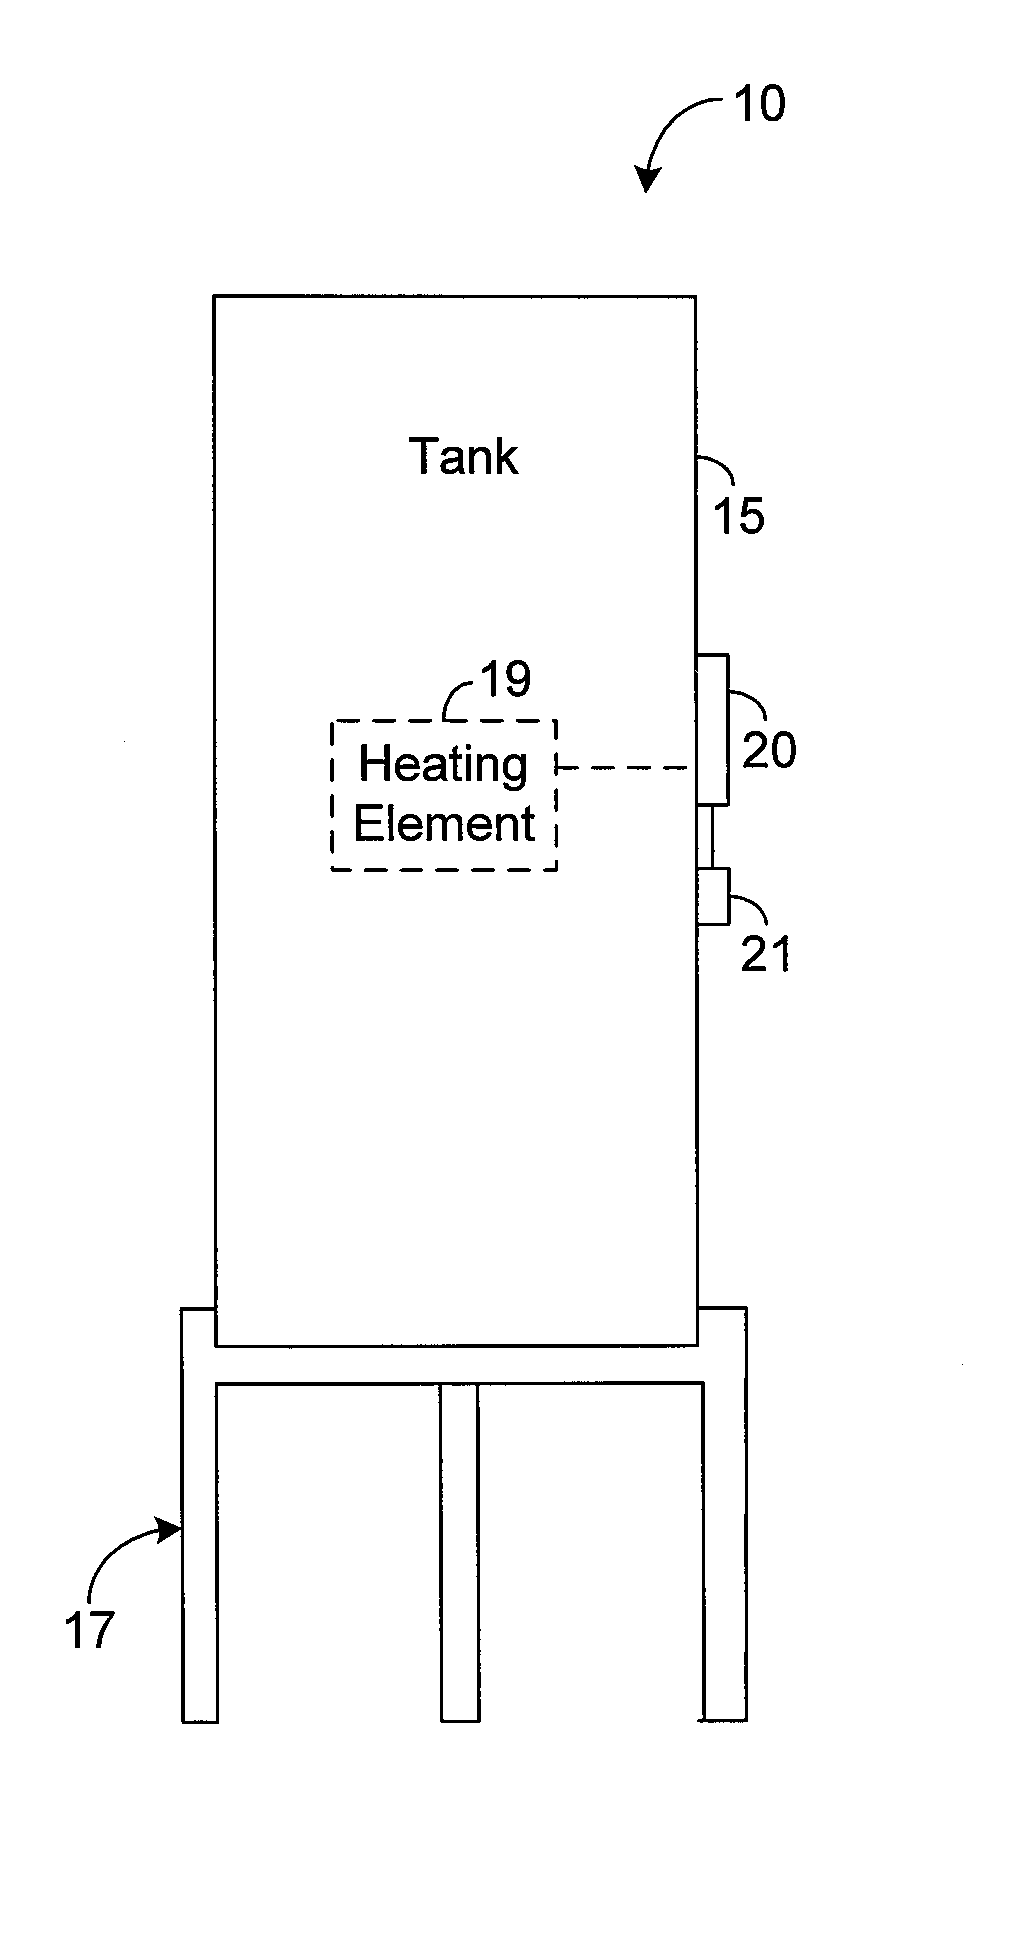 Modular control system and method for water heaters